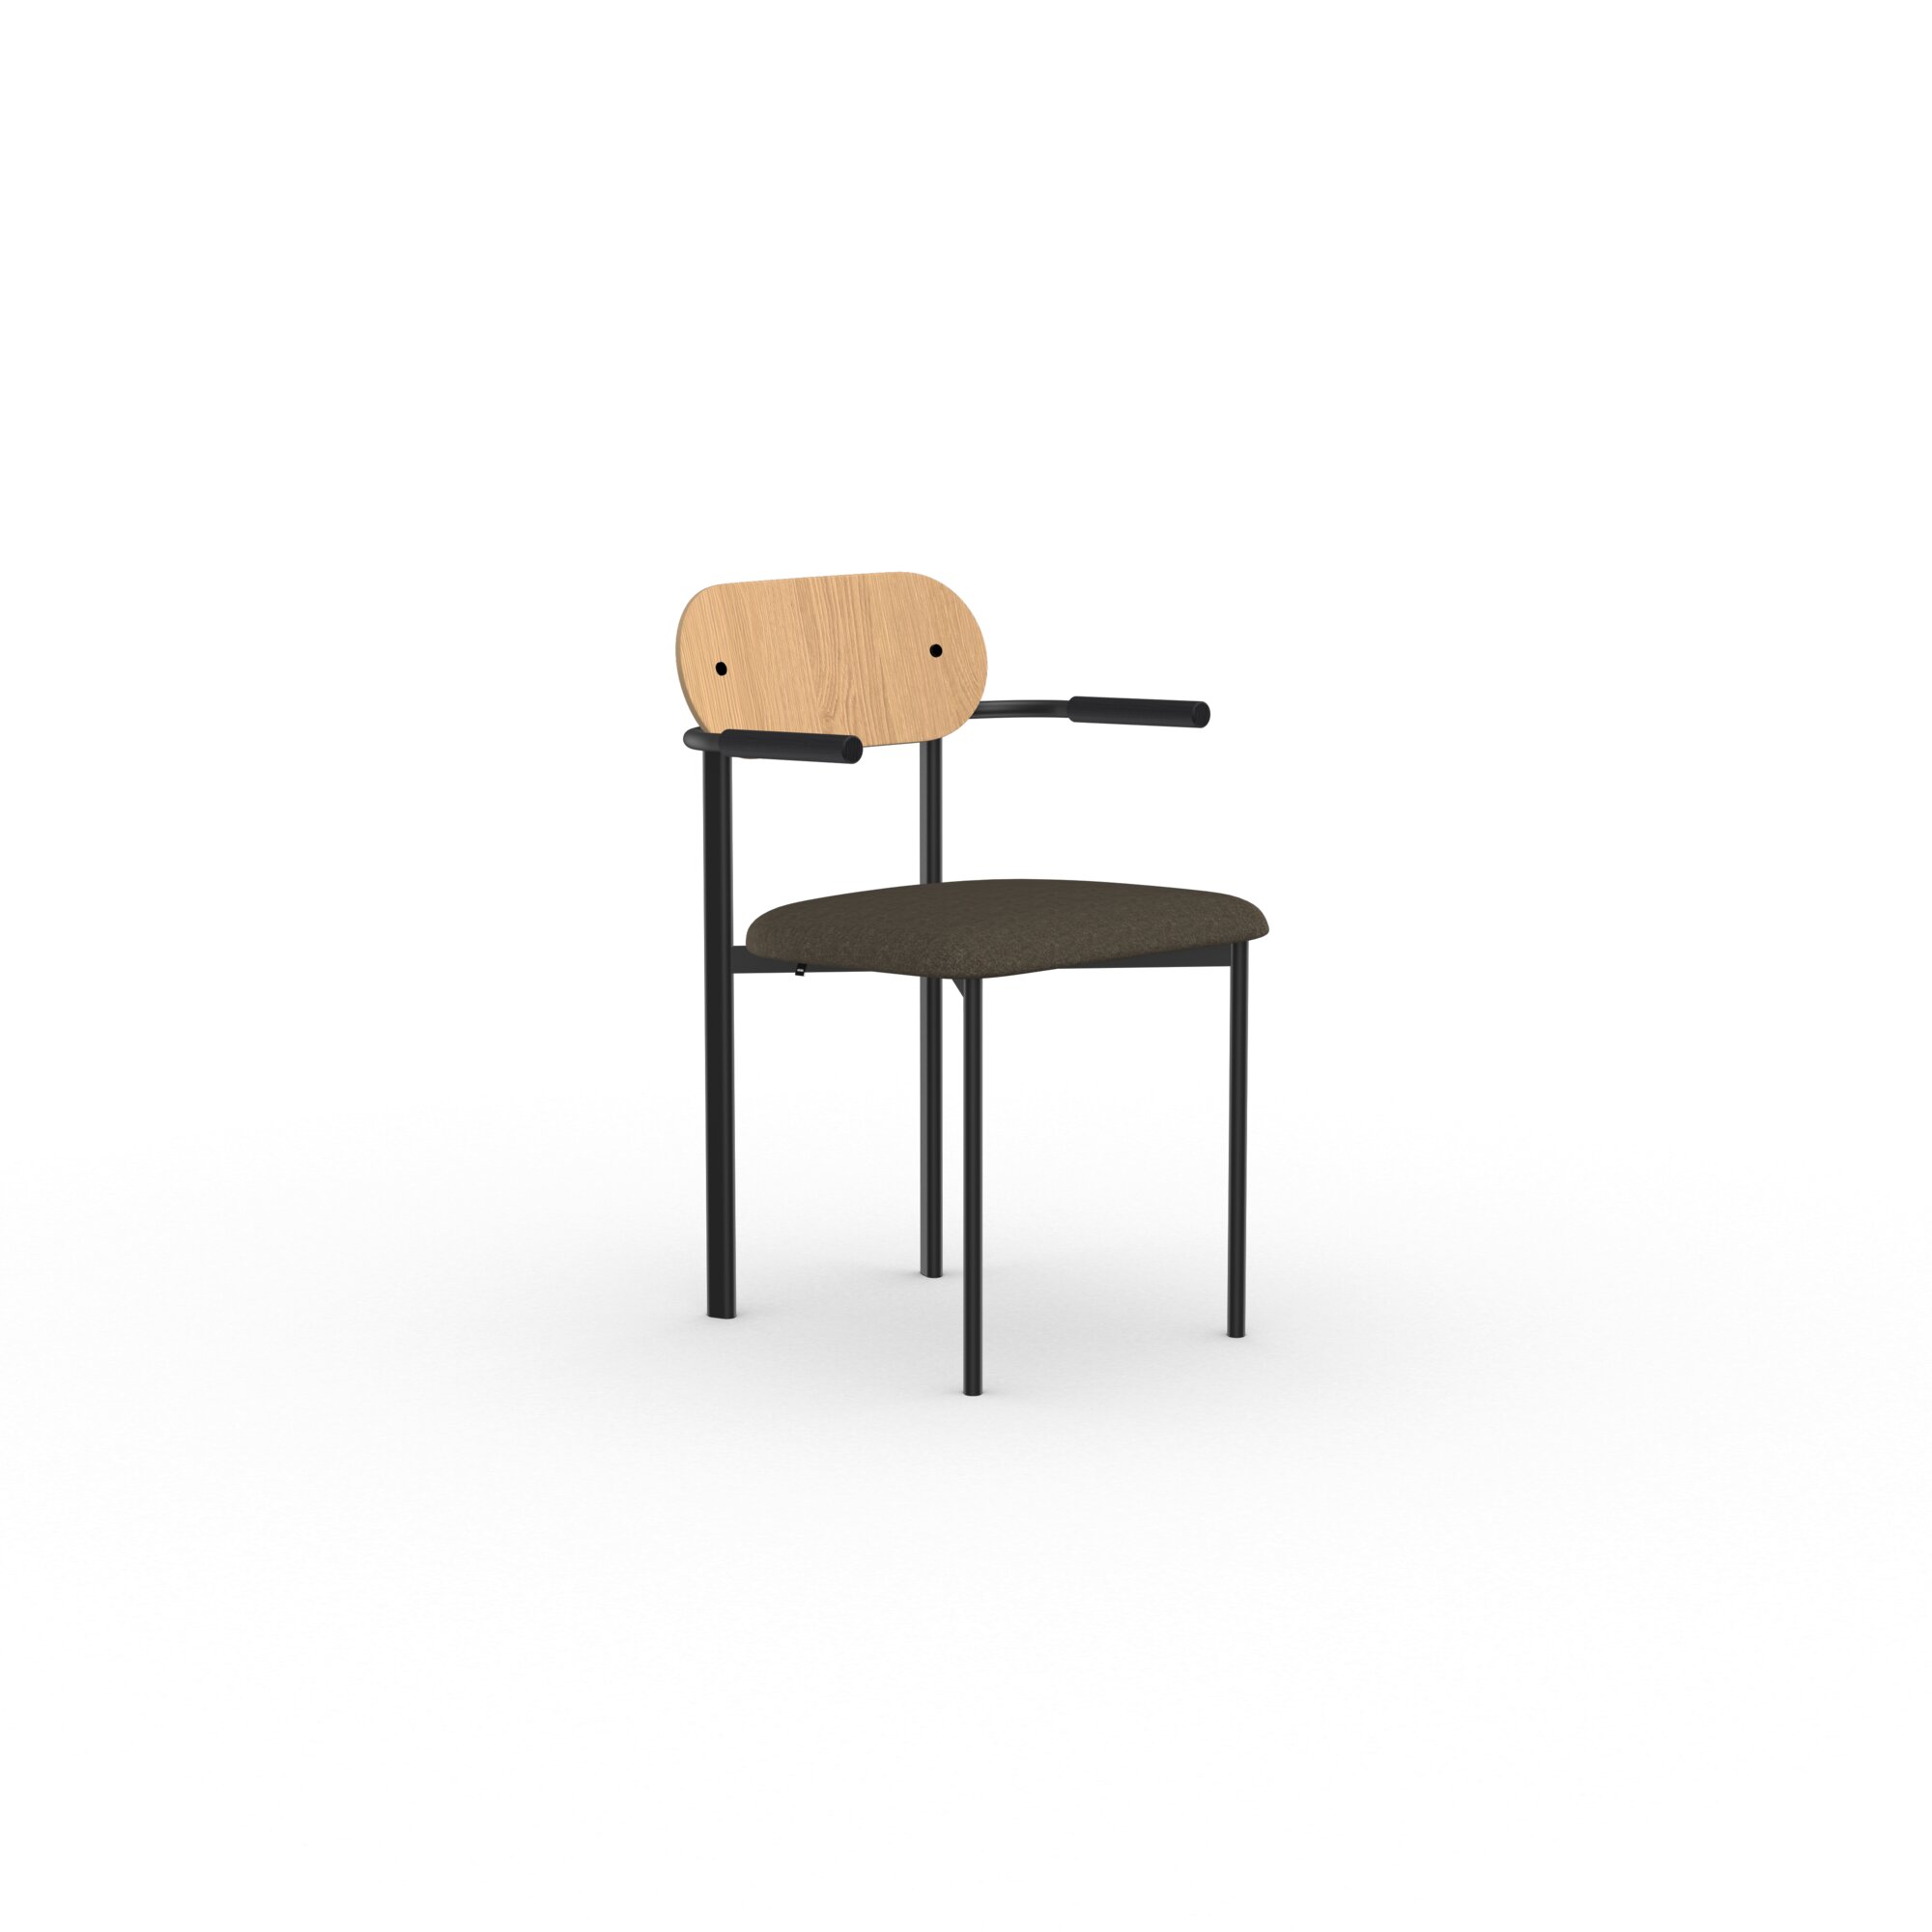 Design modern dining chair | Oblique Dining Chair with Armrest Brown hemp plough01 | Studio HENK| 